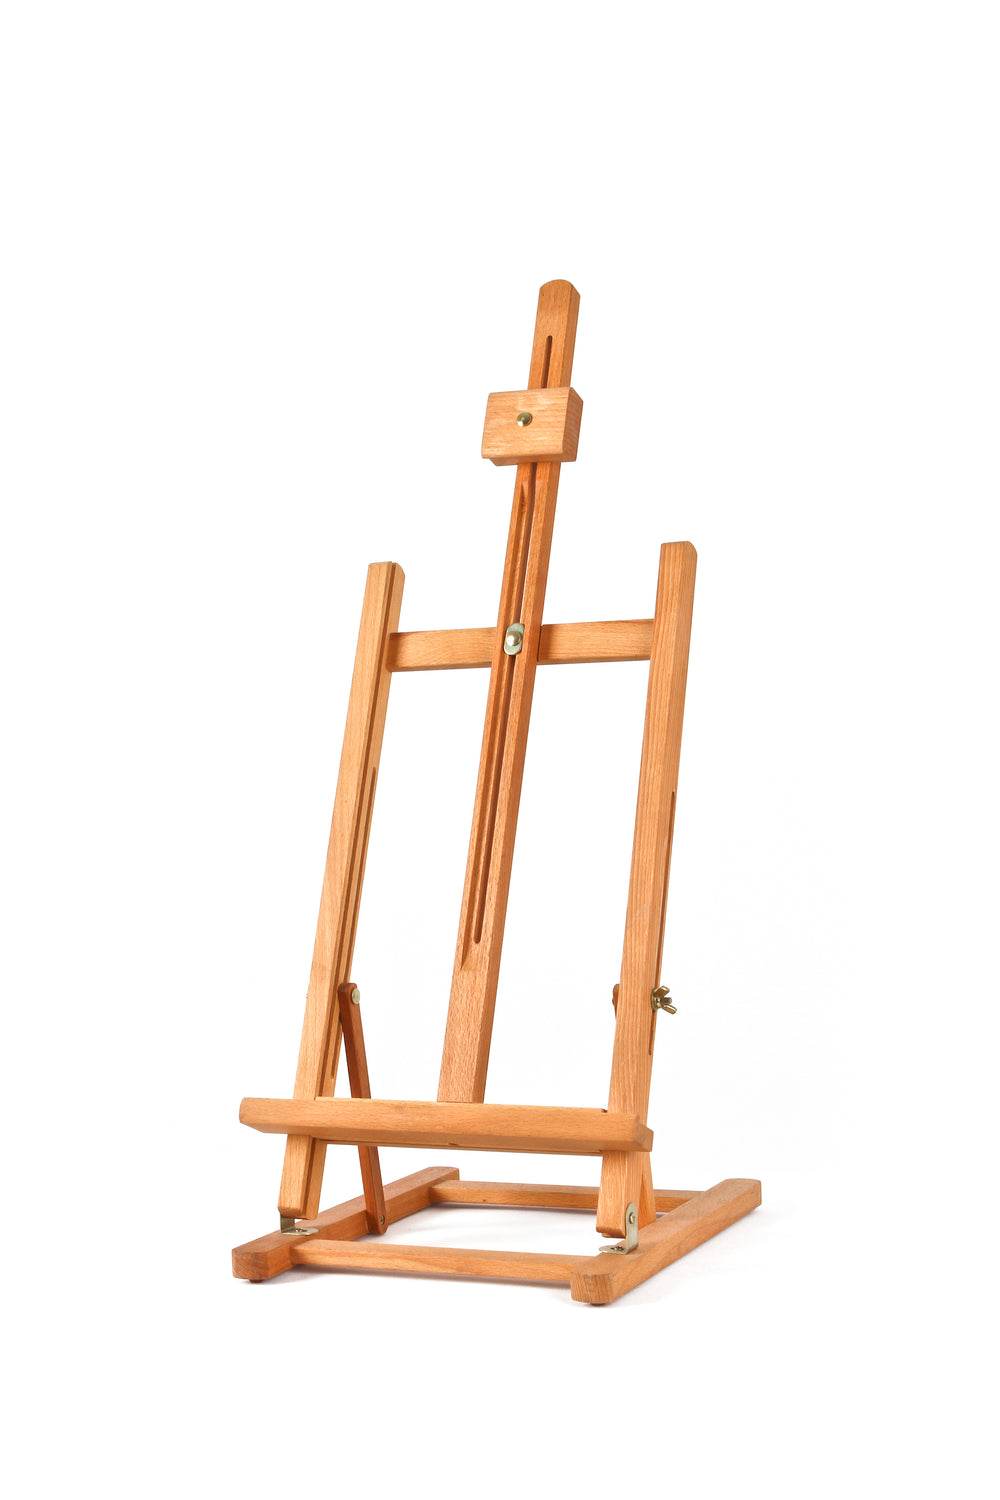 Richeson : Deluxe Table Top Easel